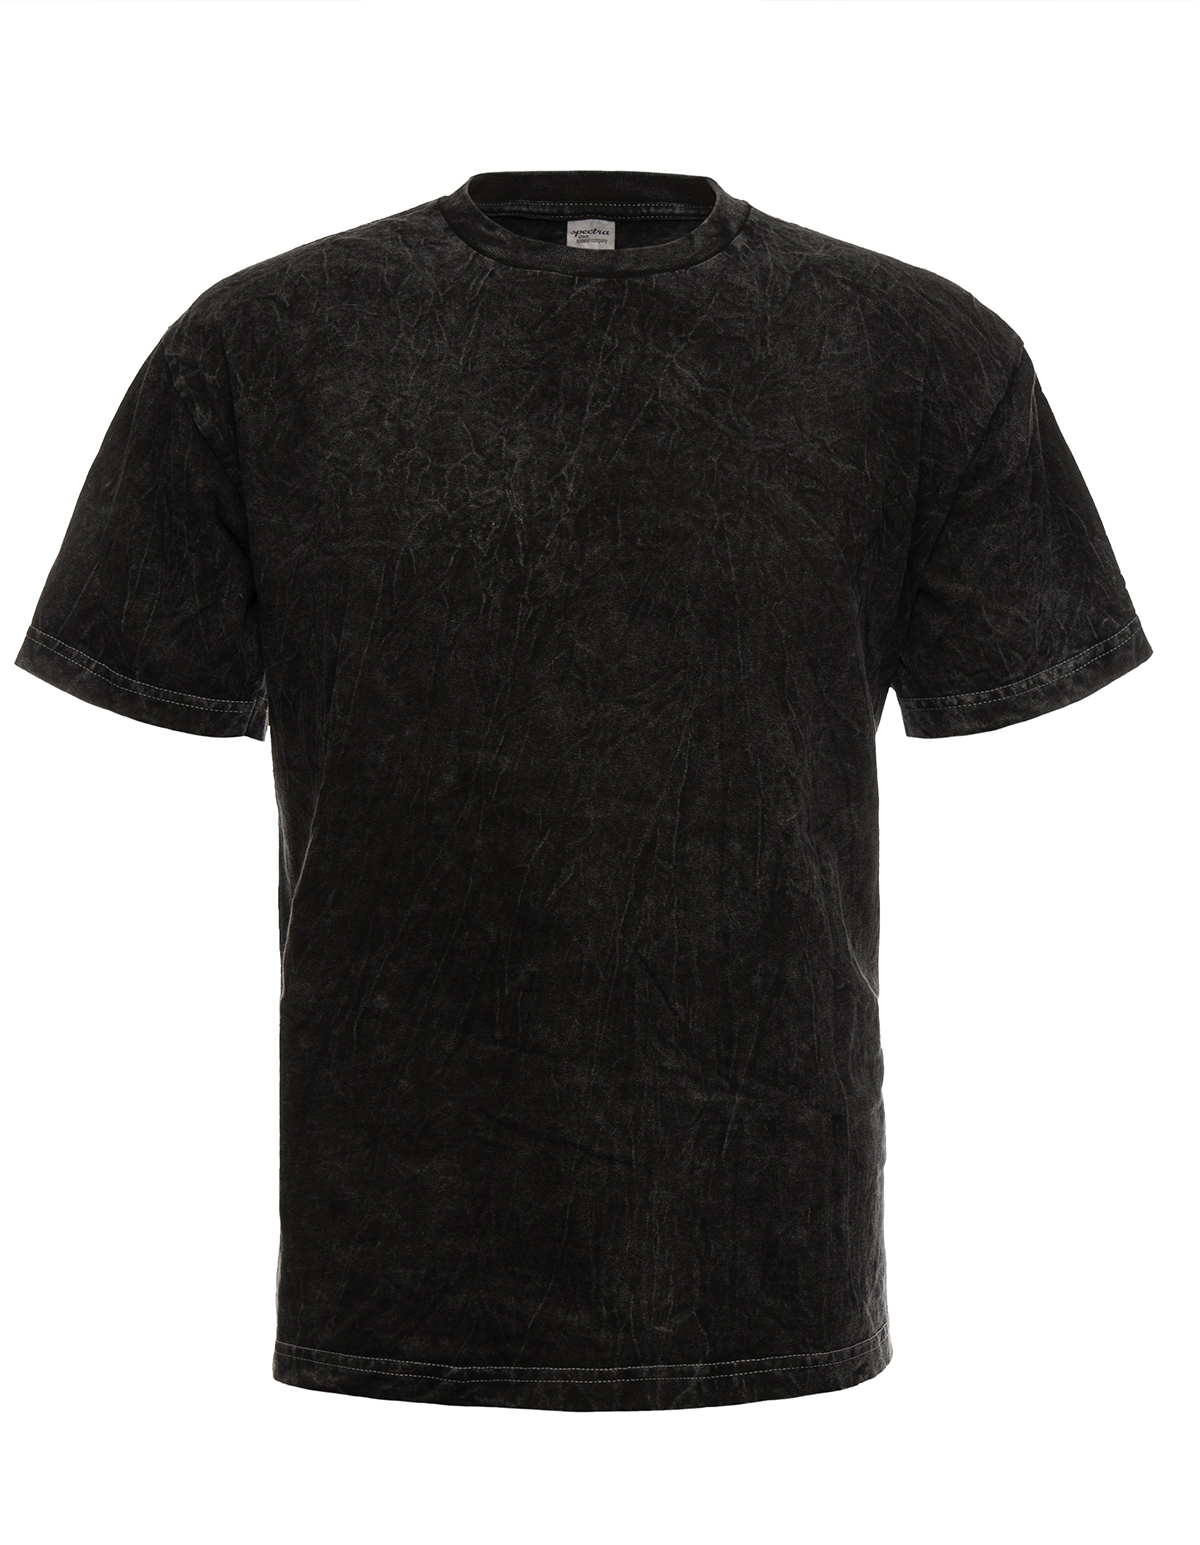 13 Mineral - Mineralwash Carbon Front T-shirt